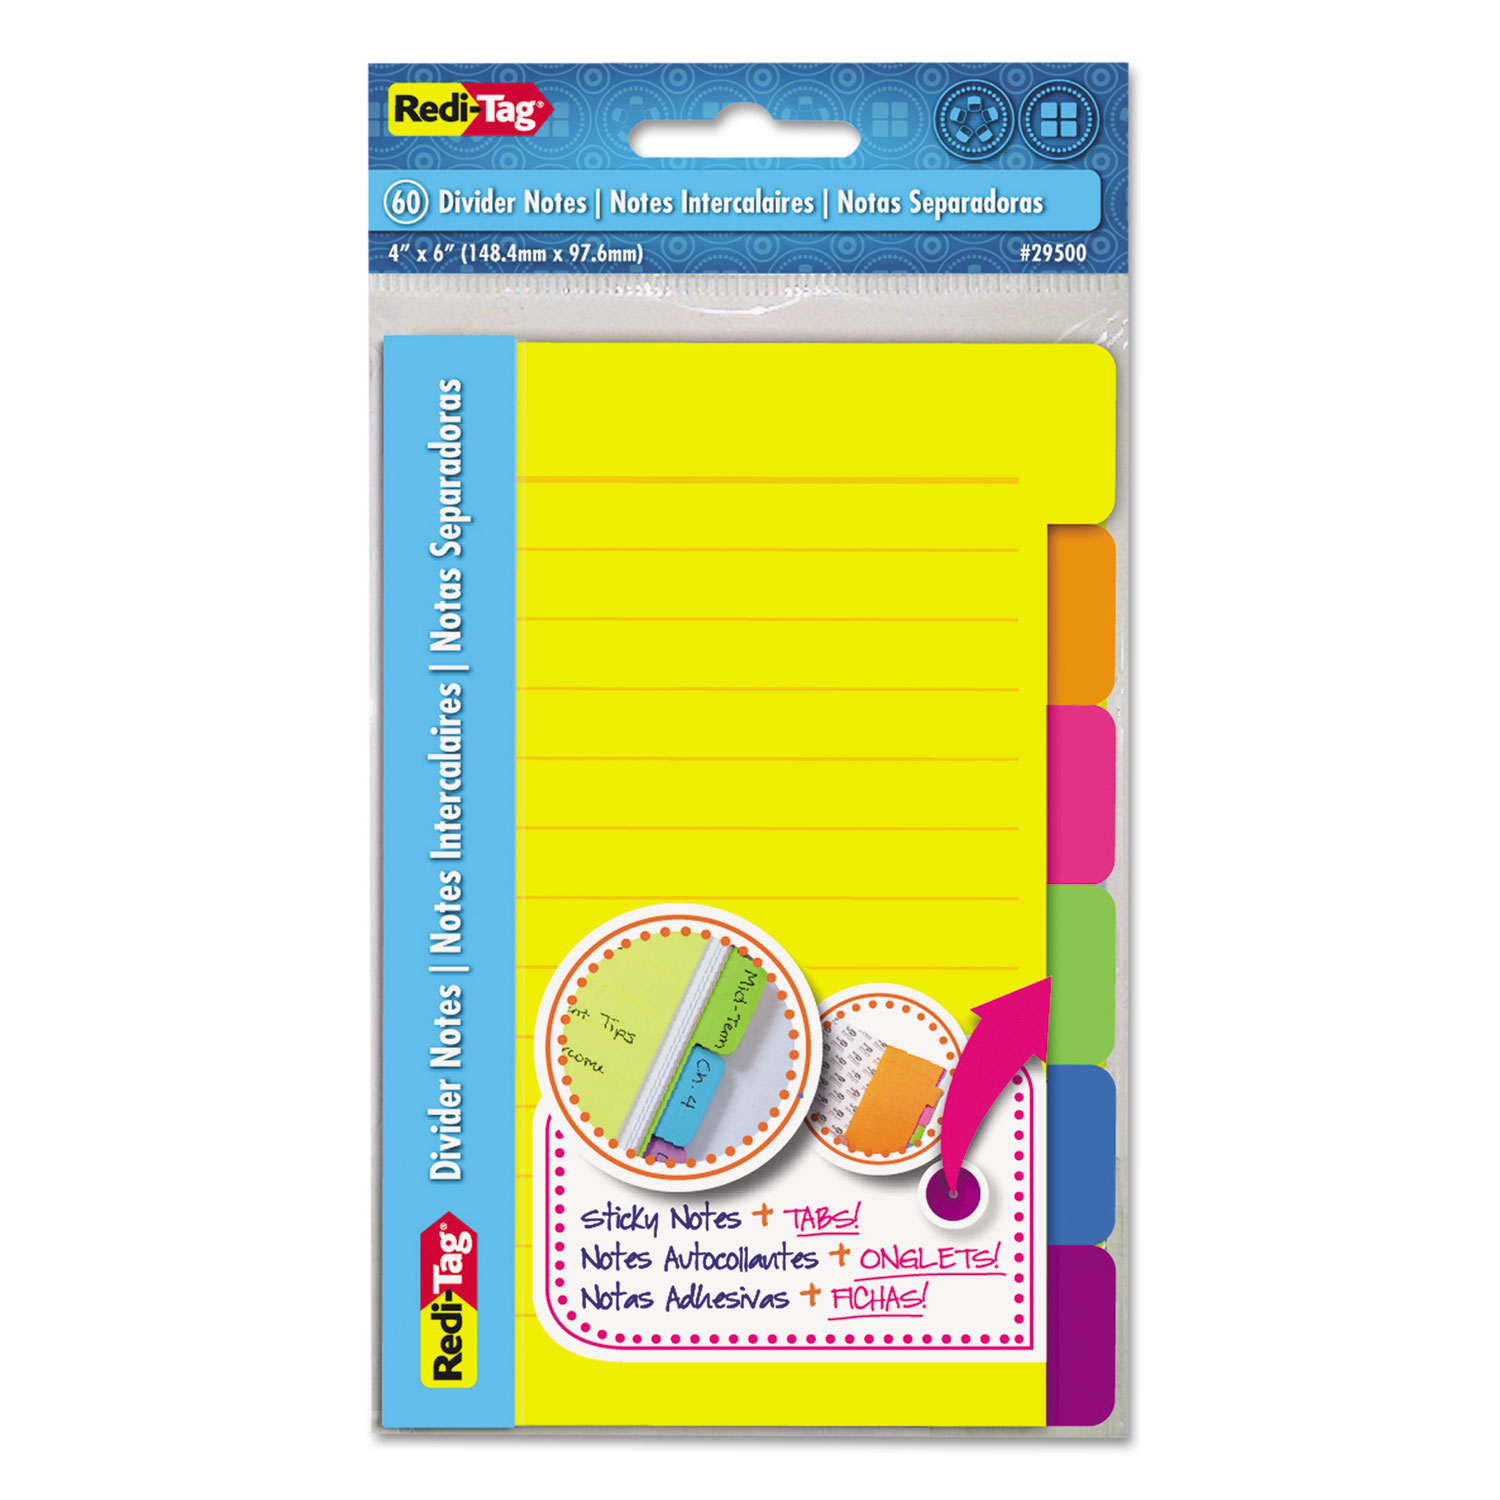  Redi-Tag 29500 Index Sticky Notes, 4 x 6, Ruled, Assorted Colors, 60-Sheet Pad (RTG29500) 